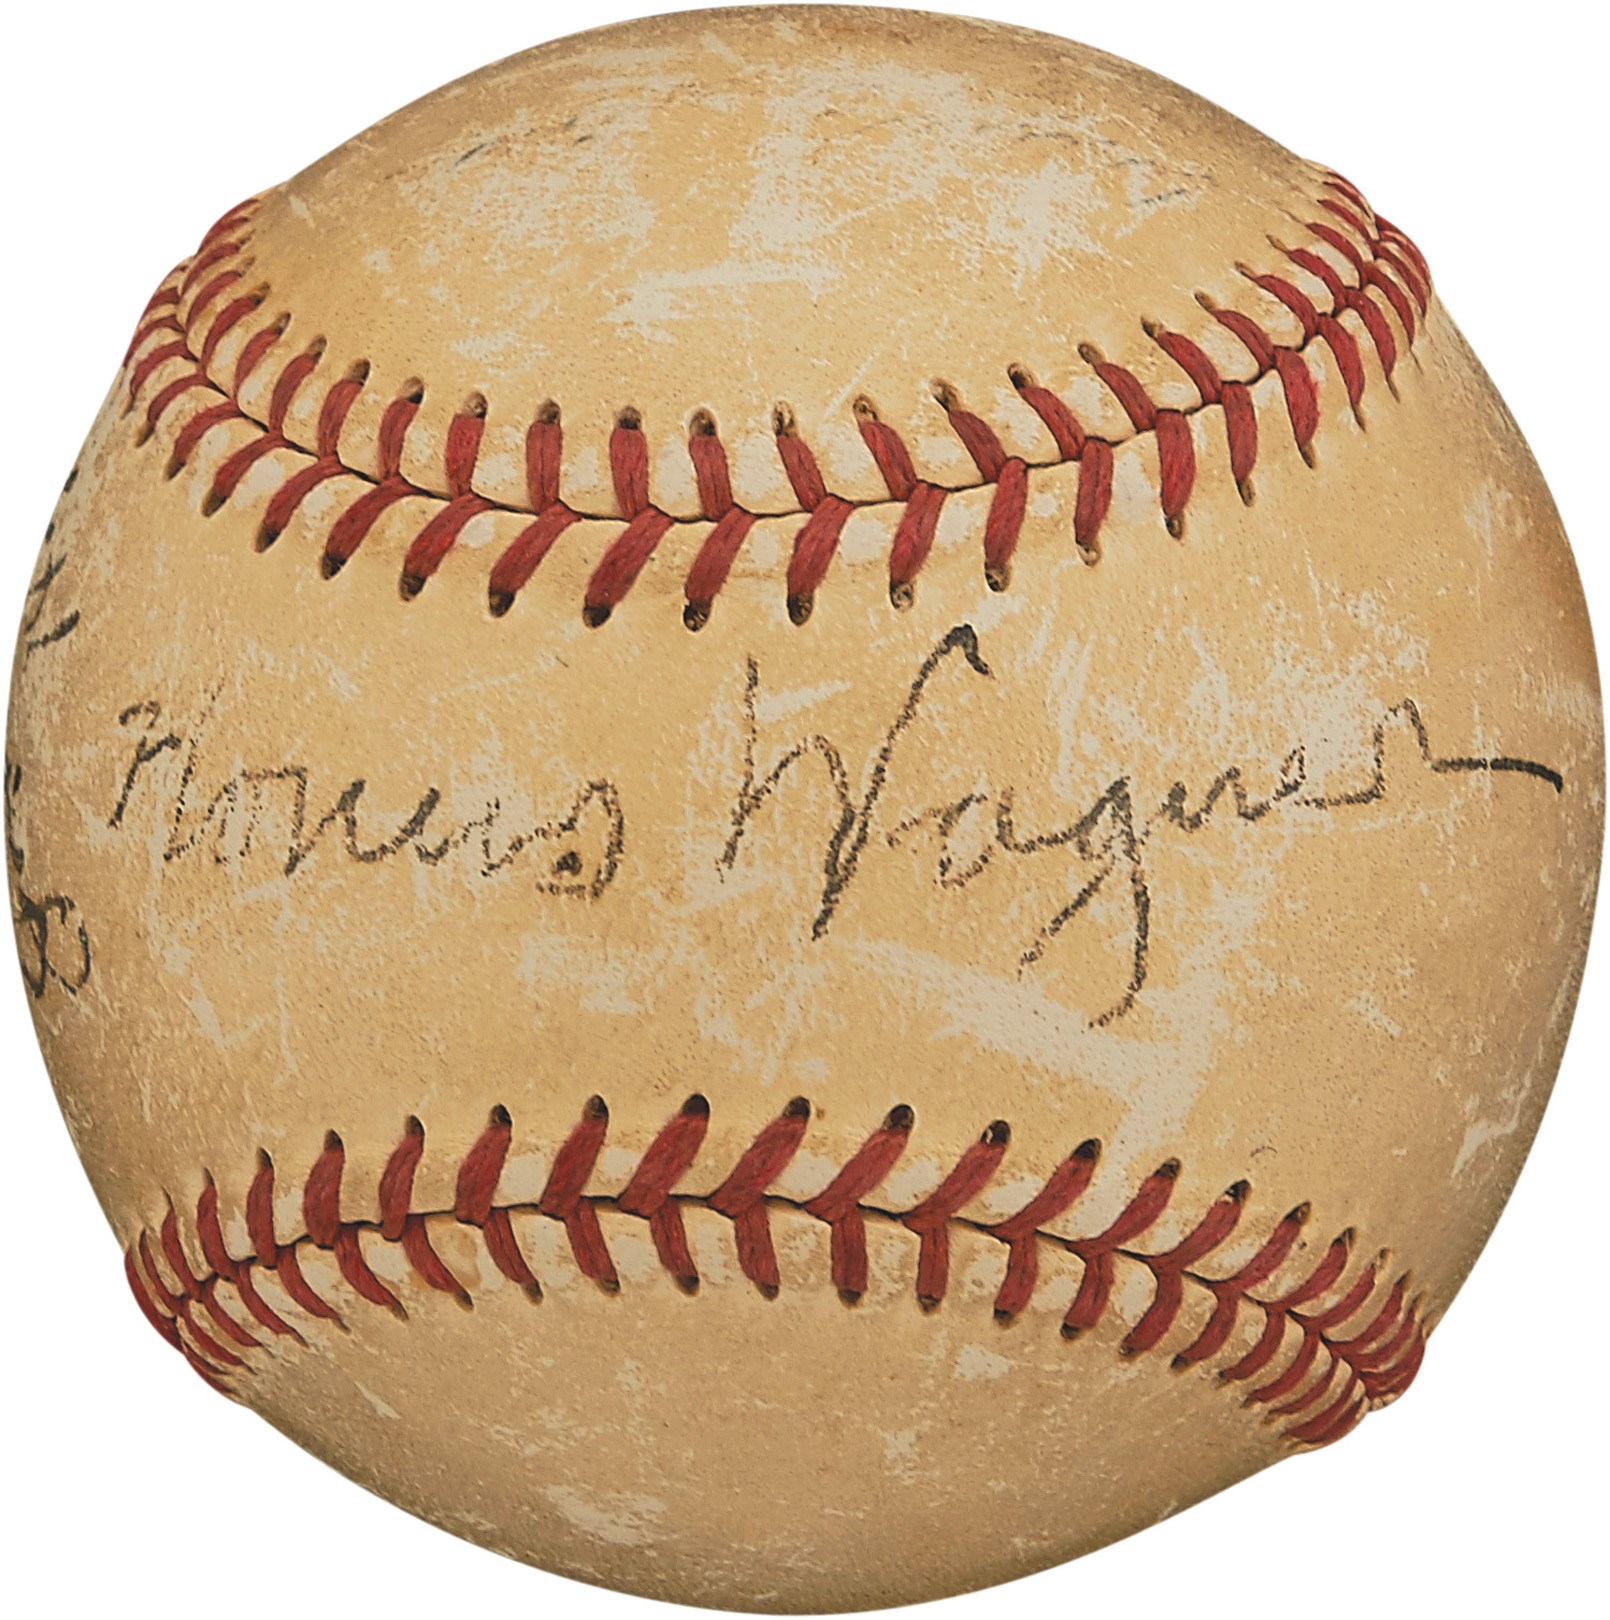 - 1950s Honus Wagner Multi-Signed Baseball with Great Display Quality (PSA)